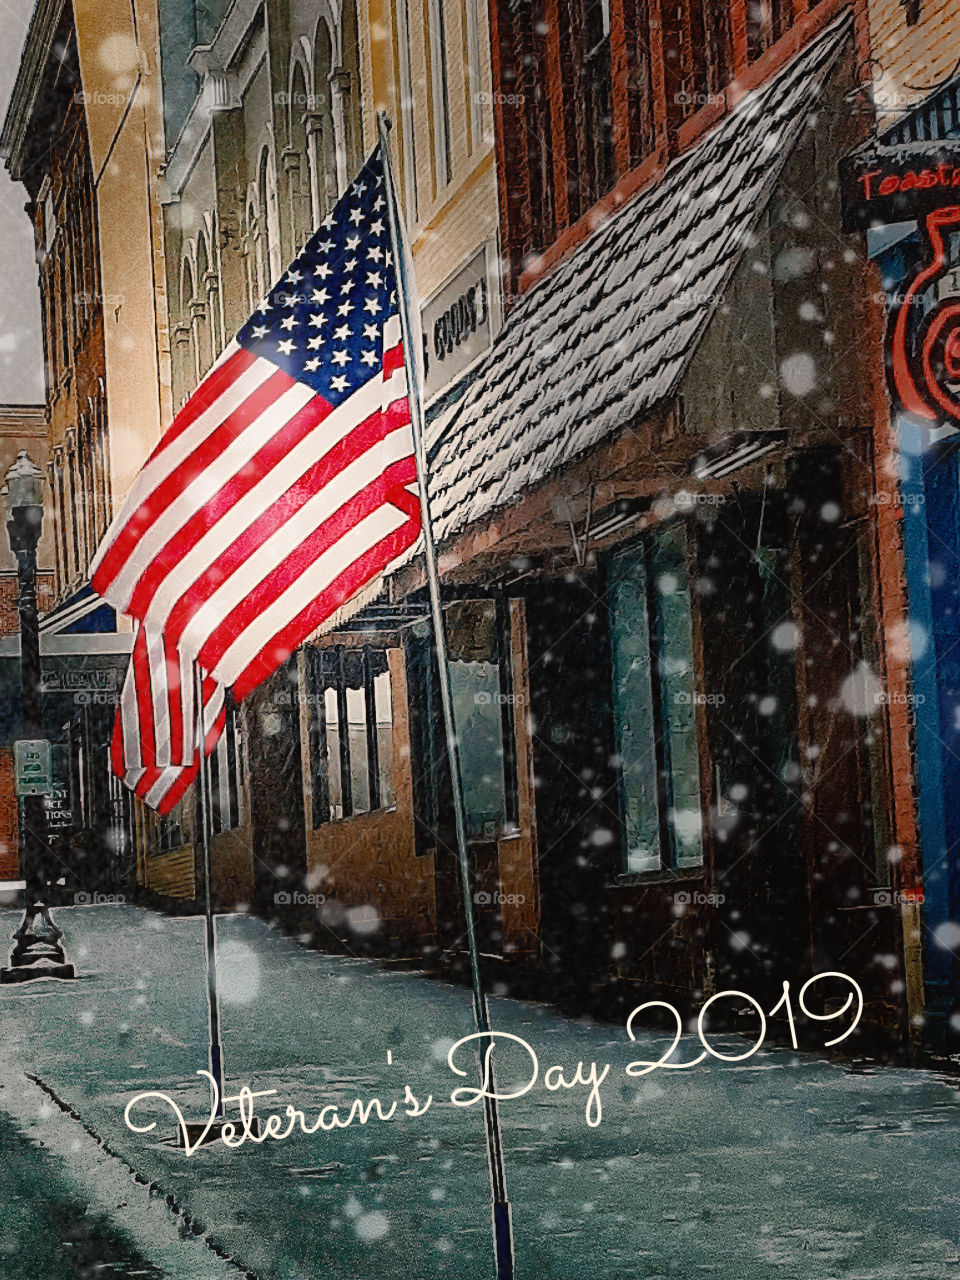 Veterans day flag and snow downtown